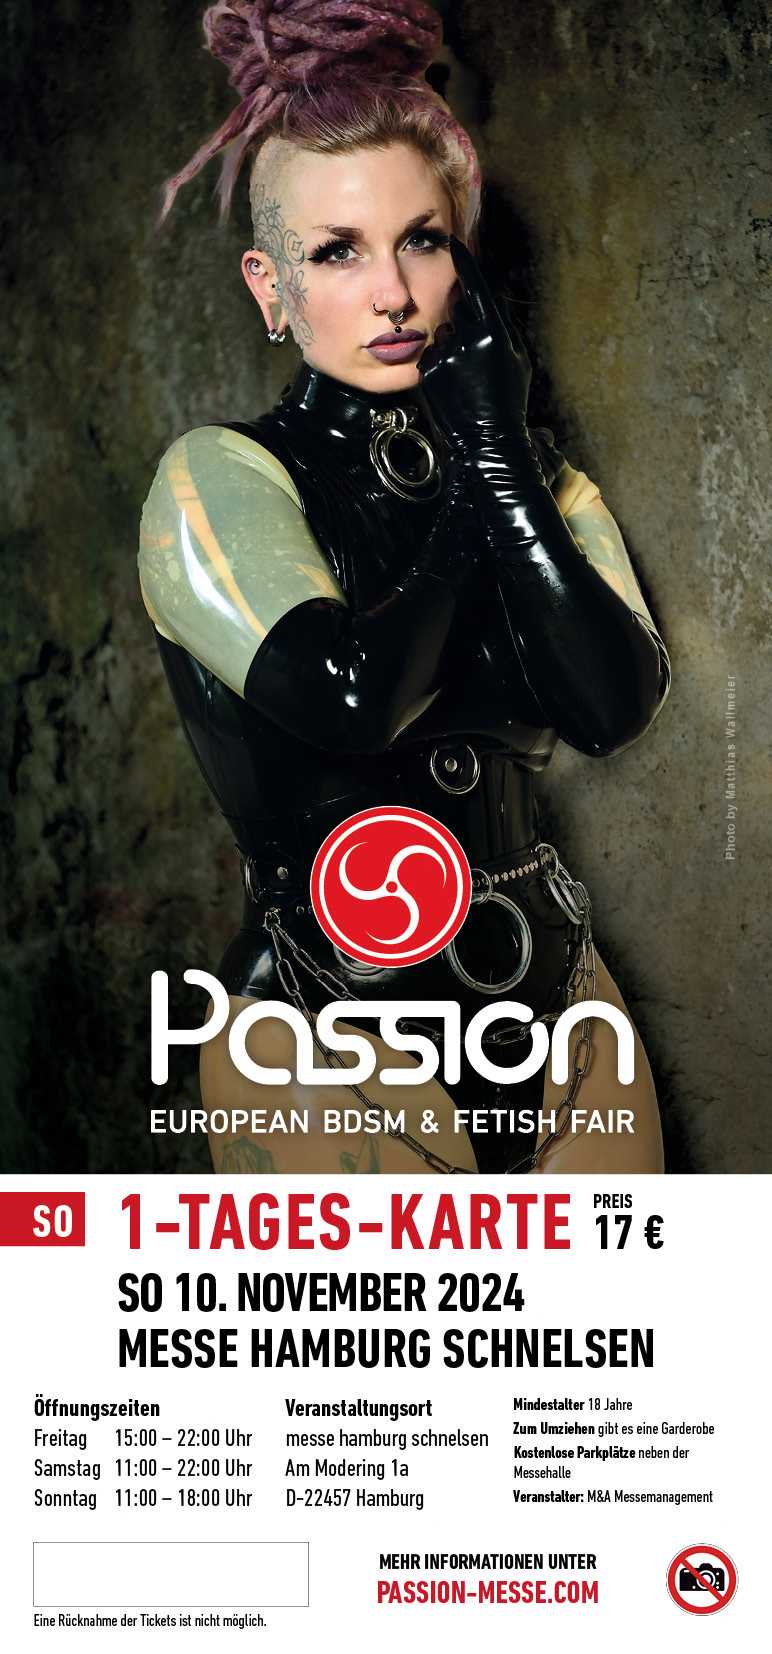 Passion Messe - 1-Tages-Messeticket Sonntag